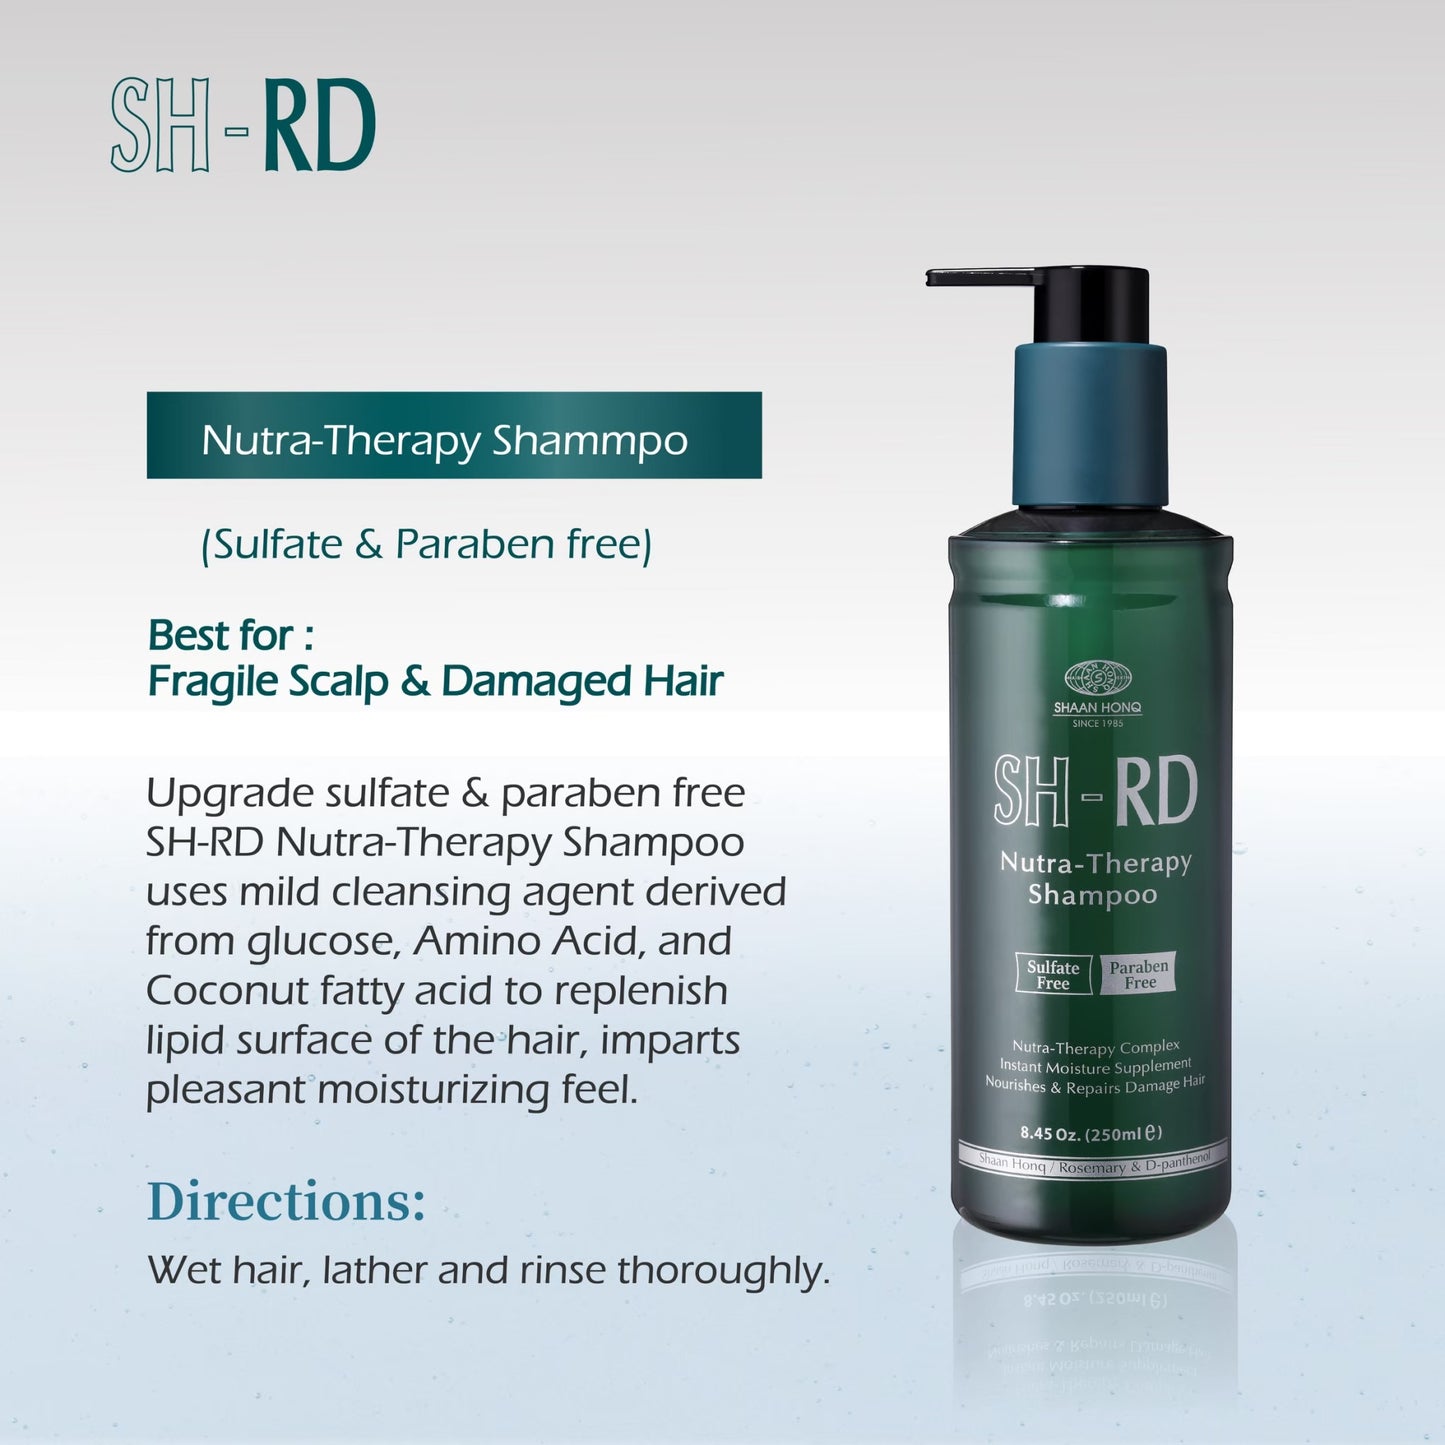 SH-RD Nutra-Therapy Shampoo (Sulfate & Paraben free) (8.45oz/250ml)